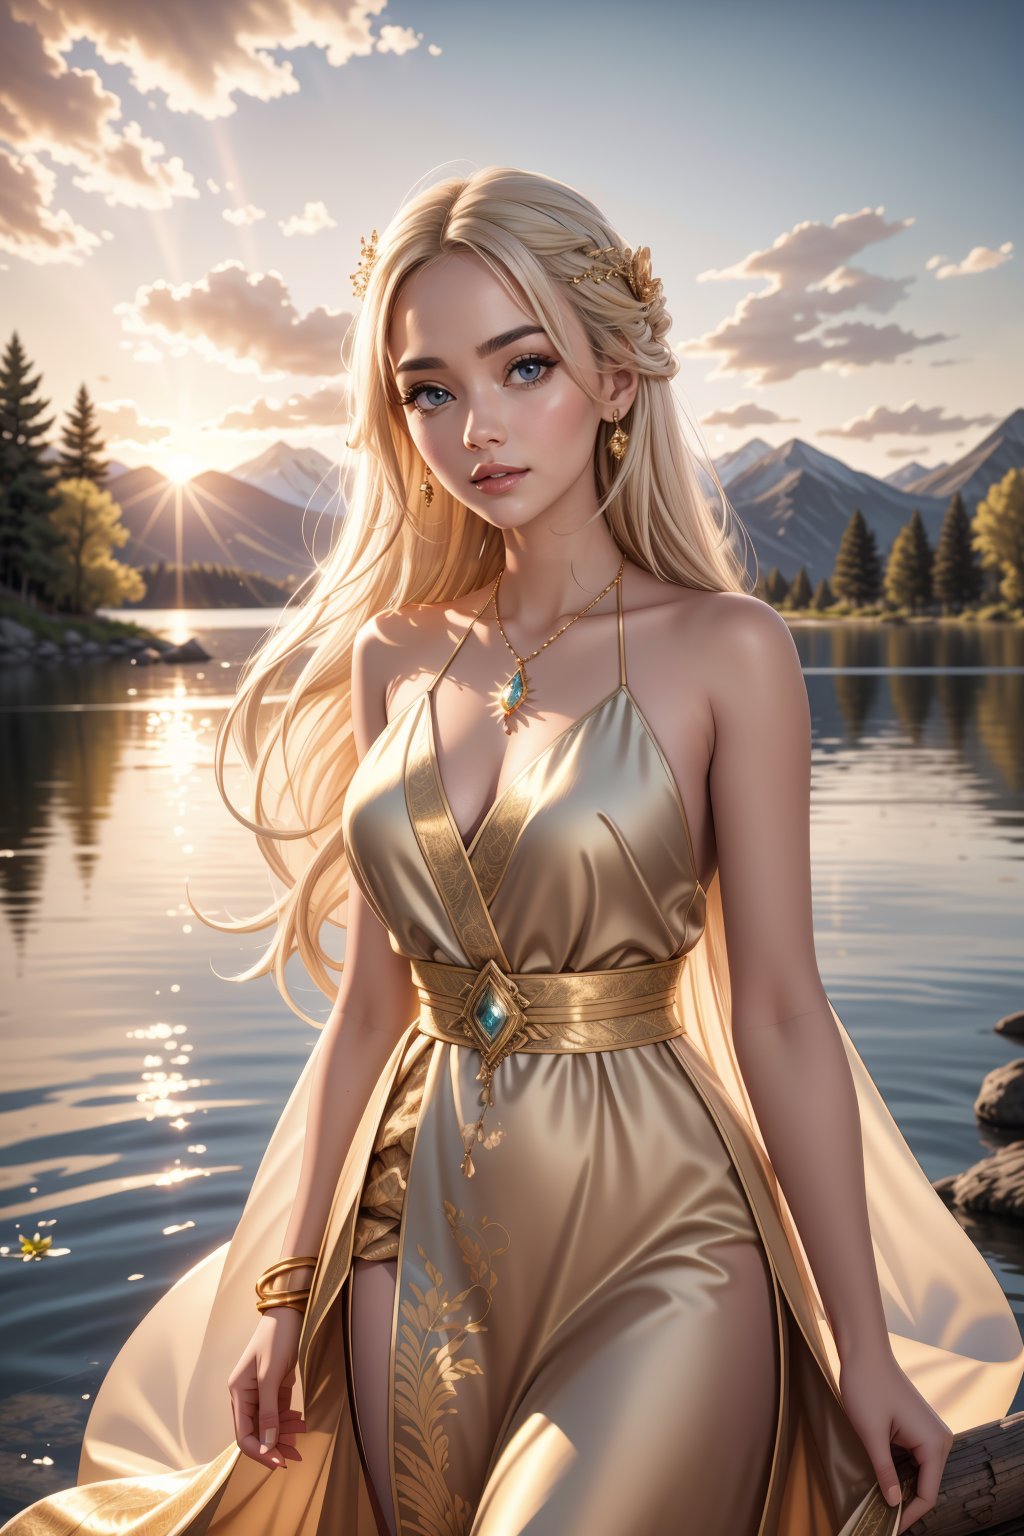 1 girl, serene expression, mesmerizing eyes, straight long blond hair, flowing dress, poised posture, porcelain skin, subtle blush, crystal pendant BREAK golden hour, (rim lighting) warm tones, sun flare, soft shadows, vibrant colors, painterly effect, dreamy atmosphere BREAK scenic lake, distant mountains, willow tree, calm water, reflection, sunlit clouds, peaceful ambiance, idyllic sunset, ultra detailed, official art, unity 8k wallpaper , zentangle,